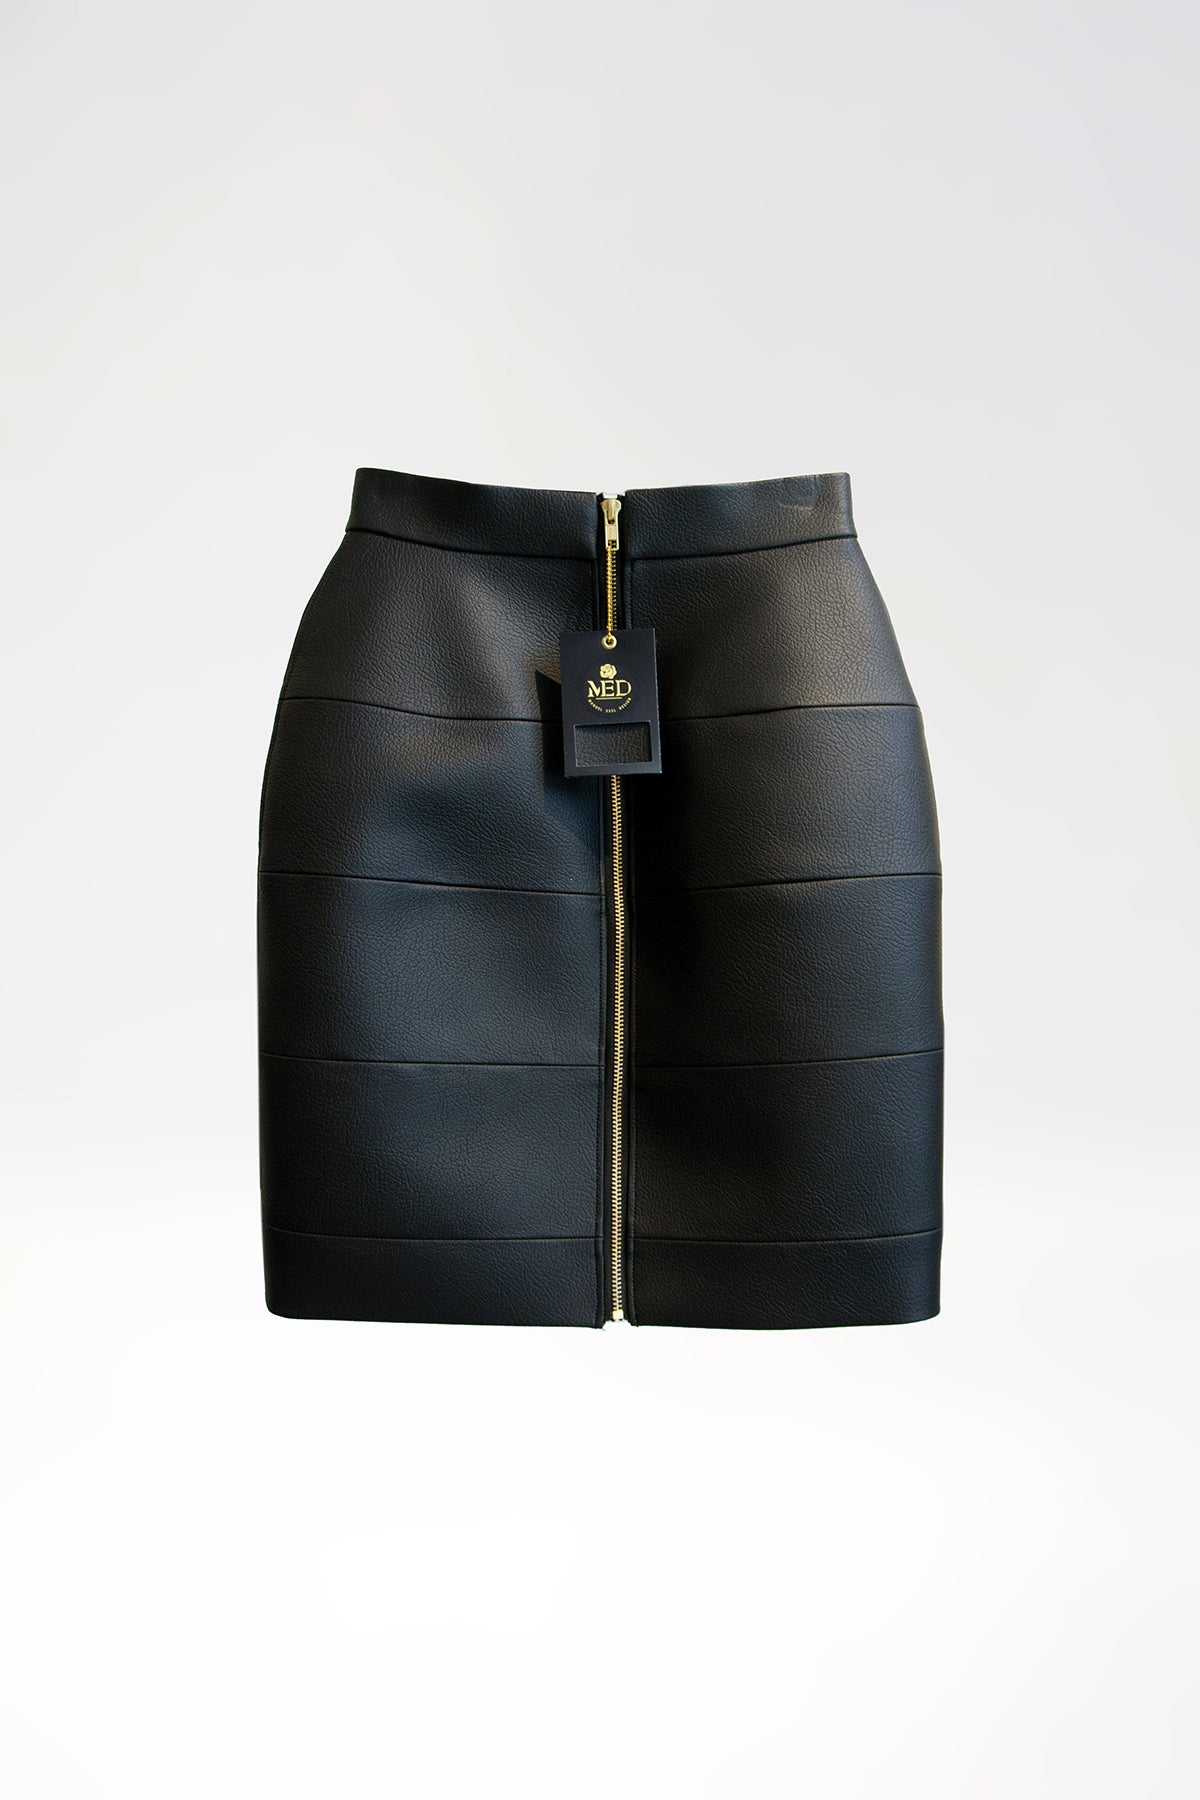 Tight Panel Skirt in Imitation Leather with Lacing - Black - Manuel Essl Design